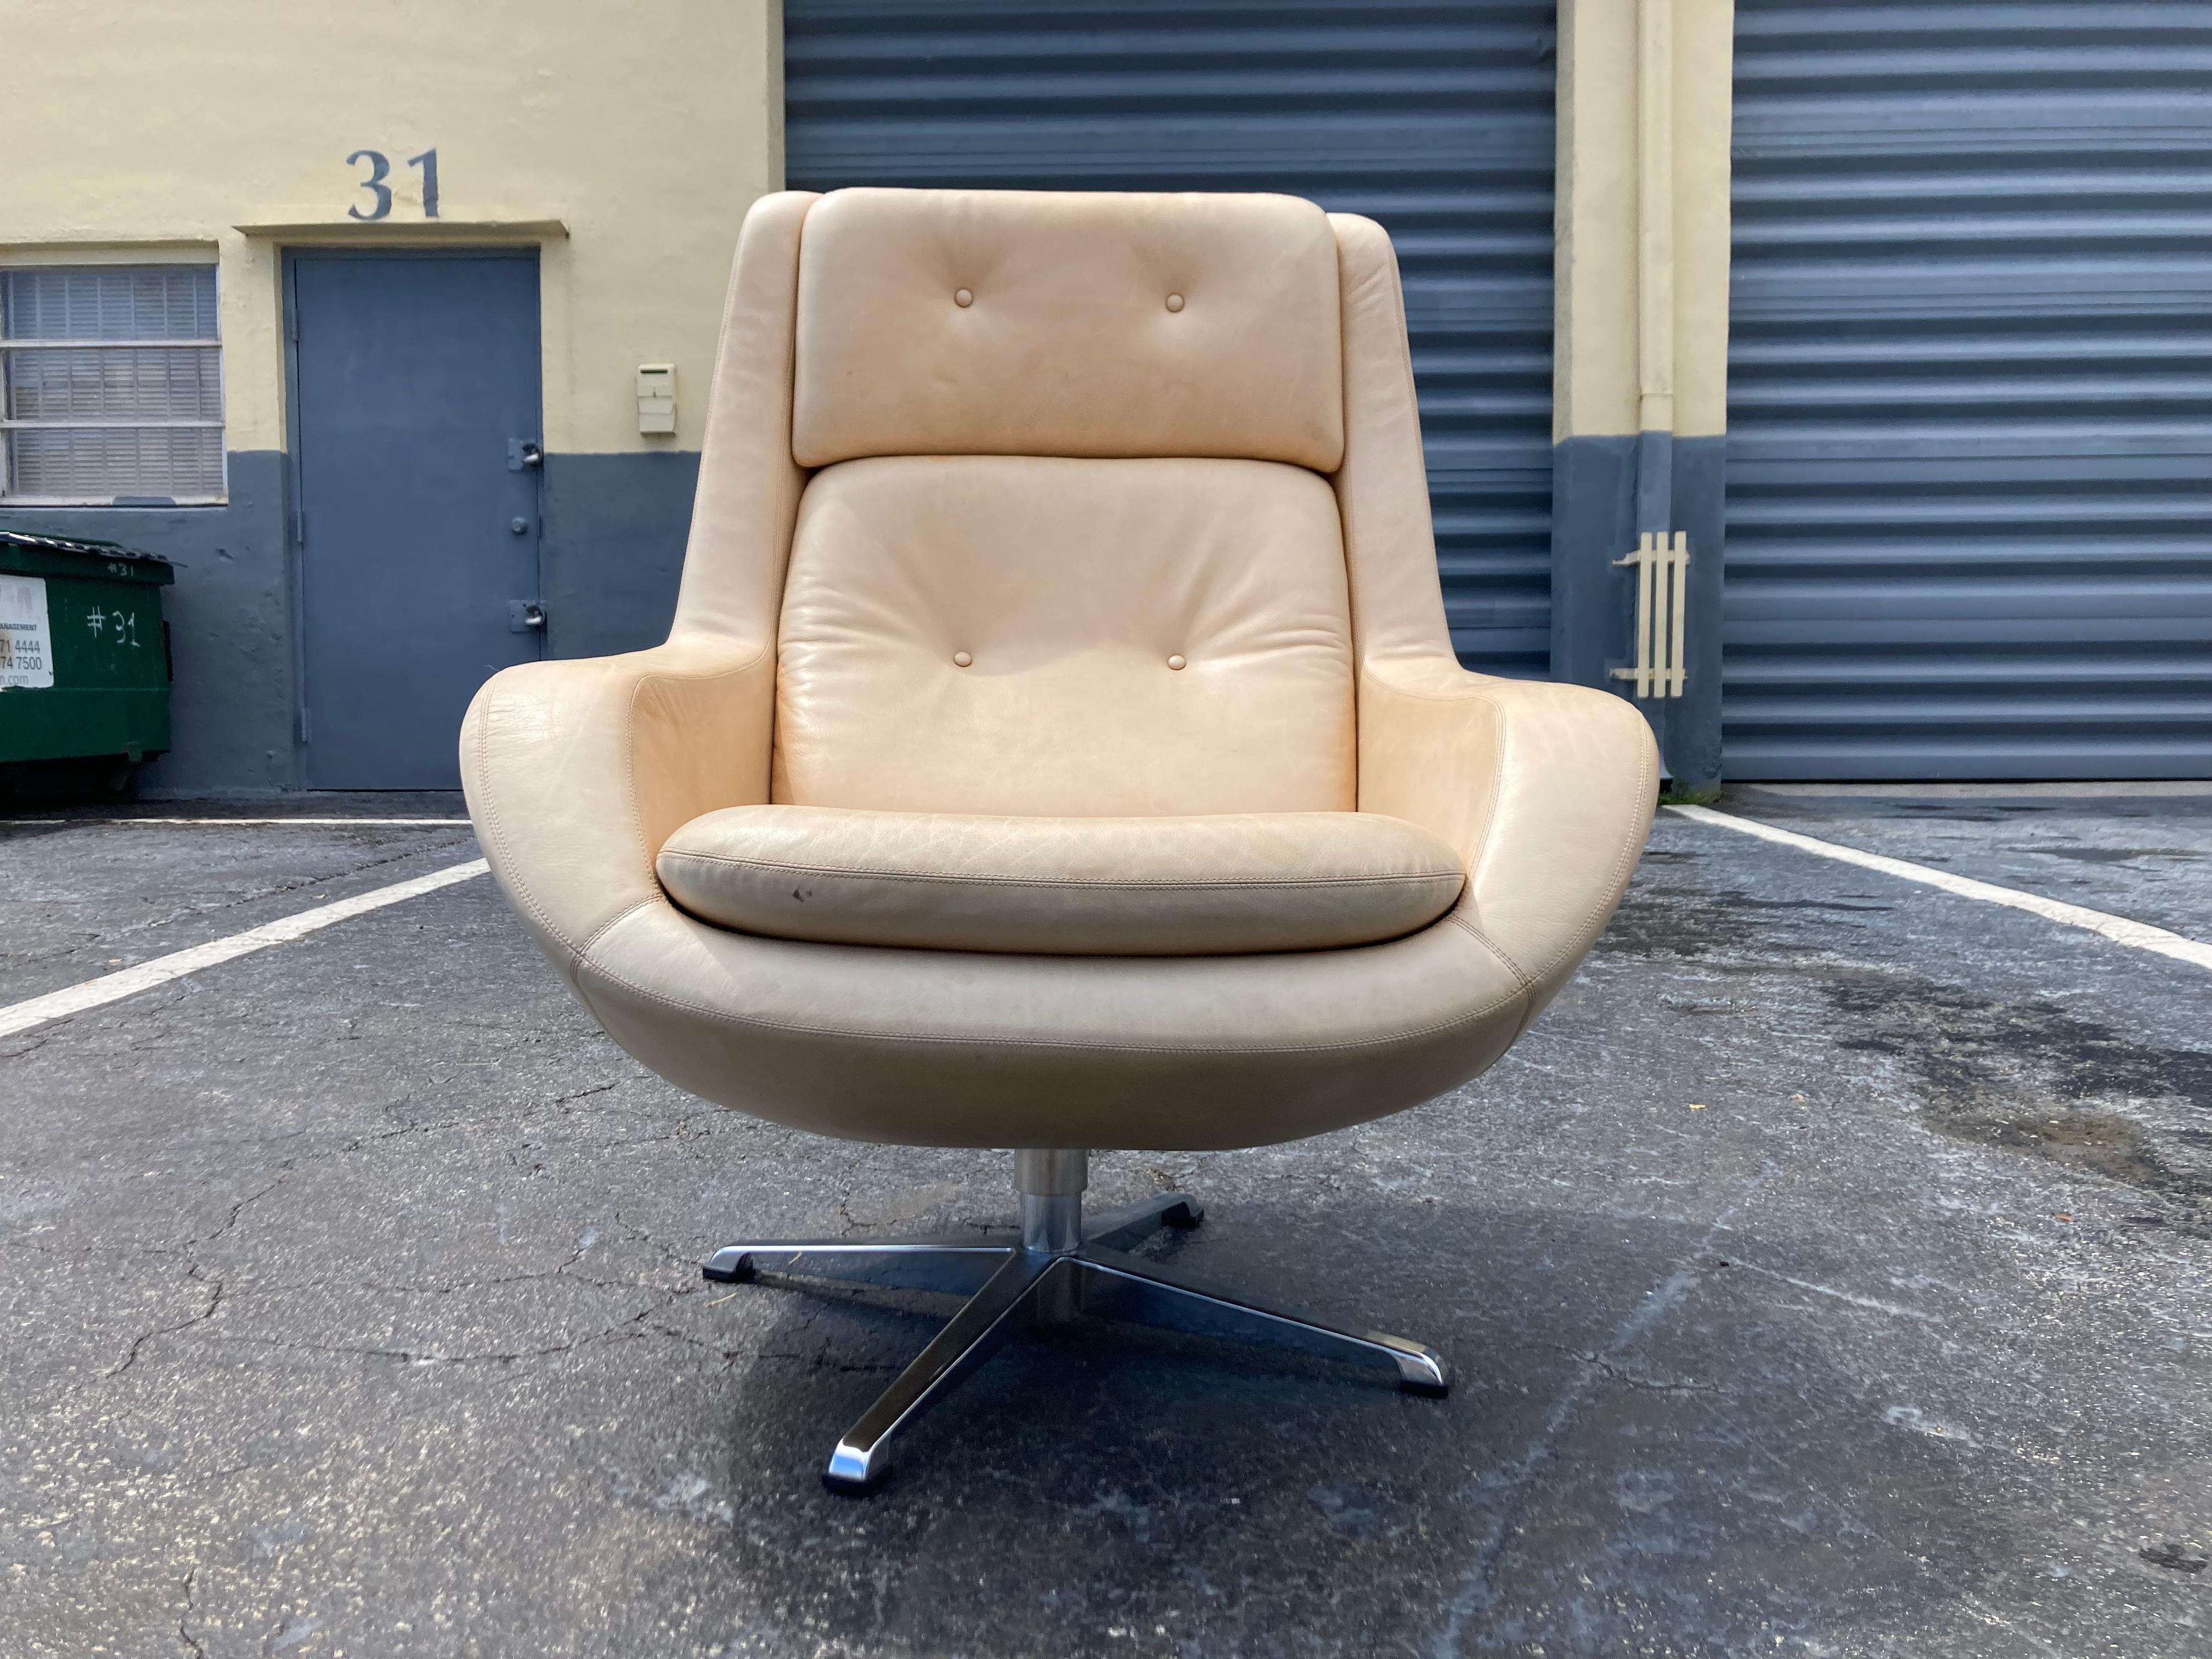 Great swivel lounge chair covered in beautiful aniline leather. Chair has some normal wear, please see all pictures. Thanks.